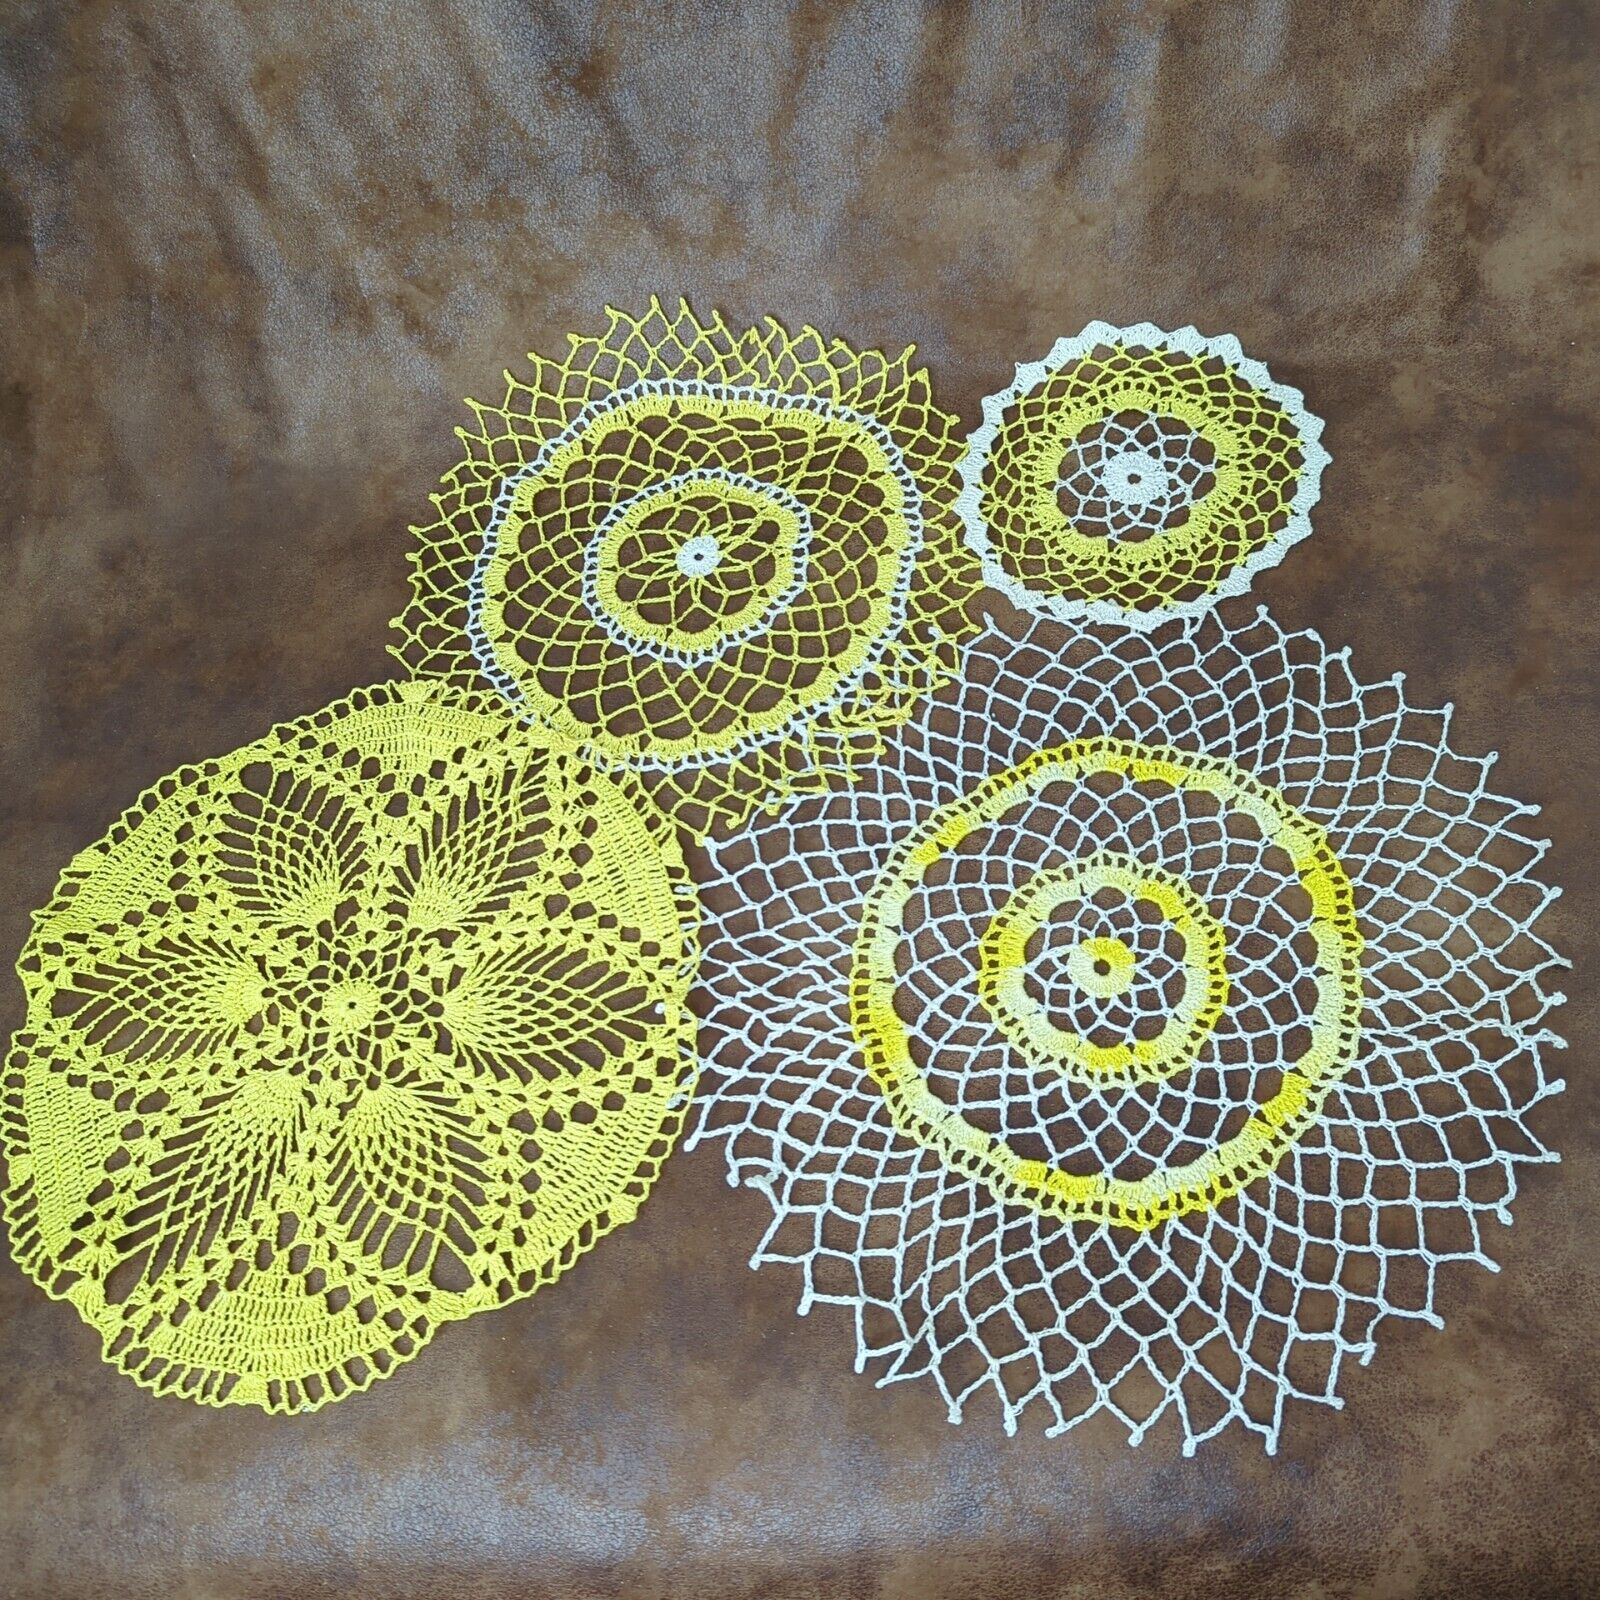 Lot of 4 Vintage Yellow Doily Doilies Crocheted 7-13 Inches Round